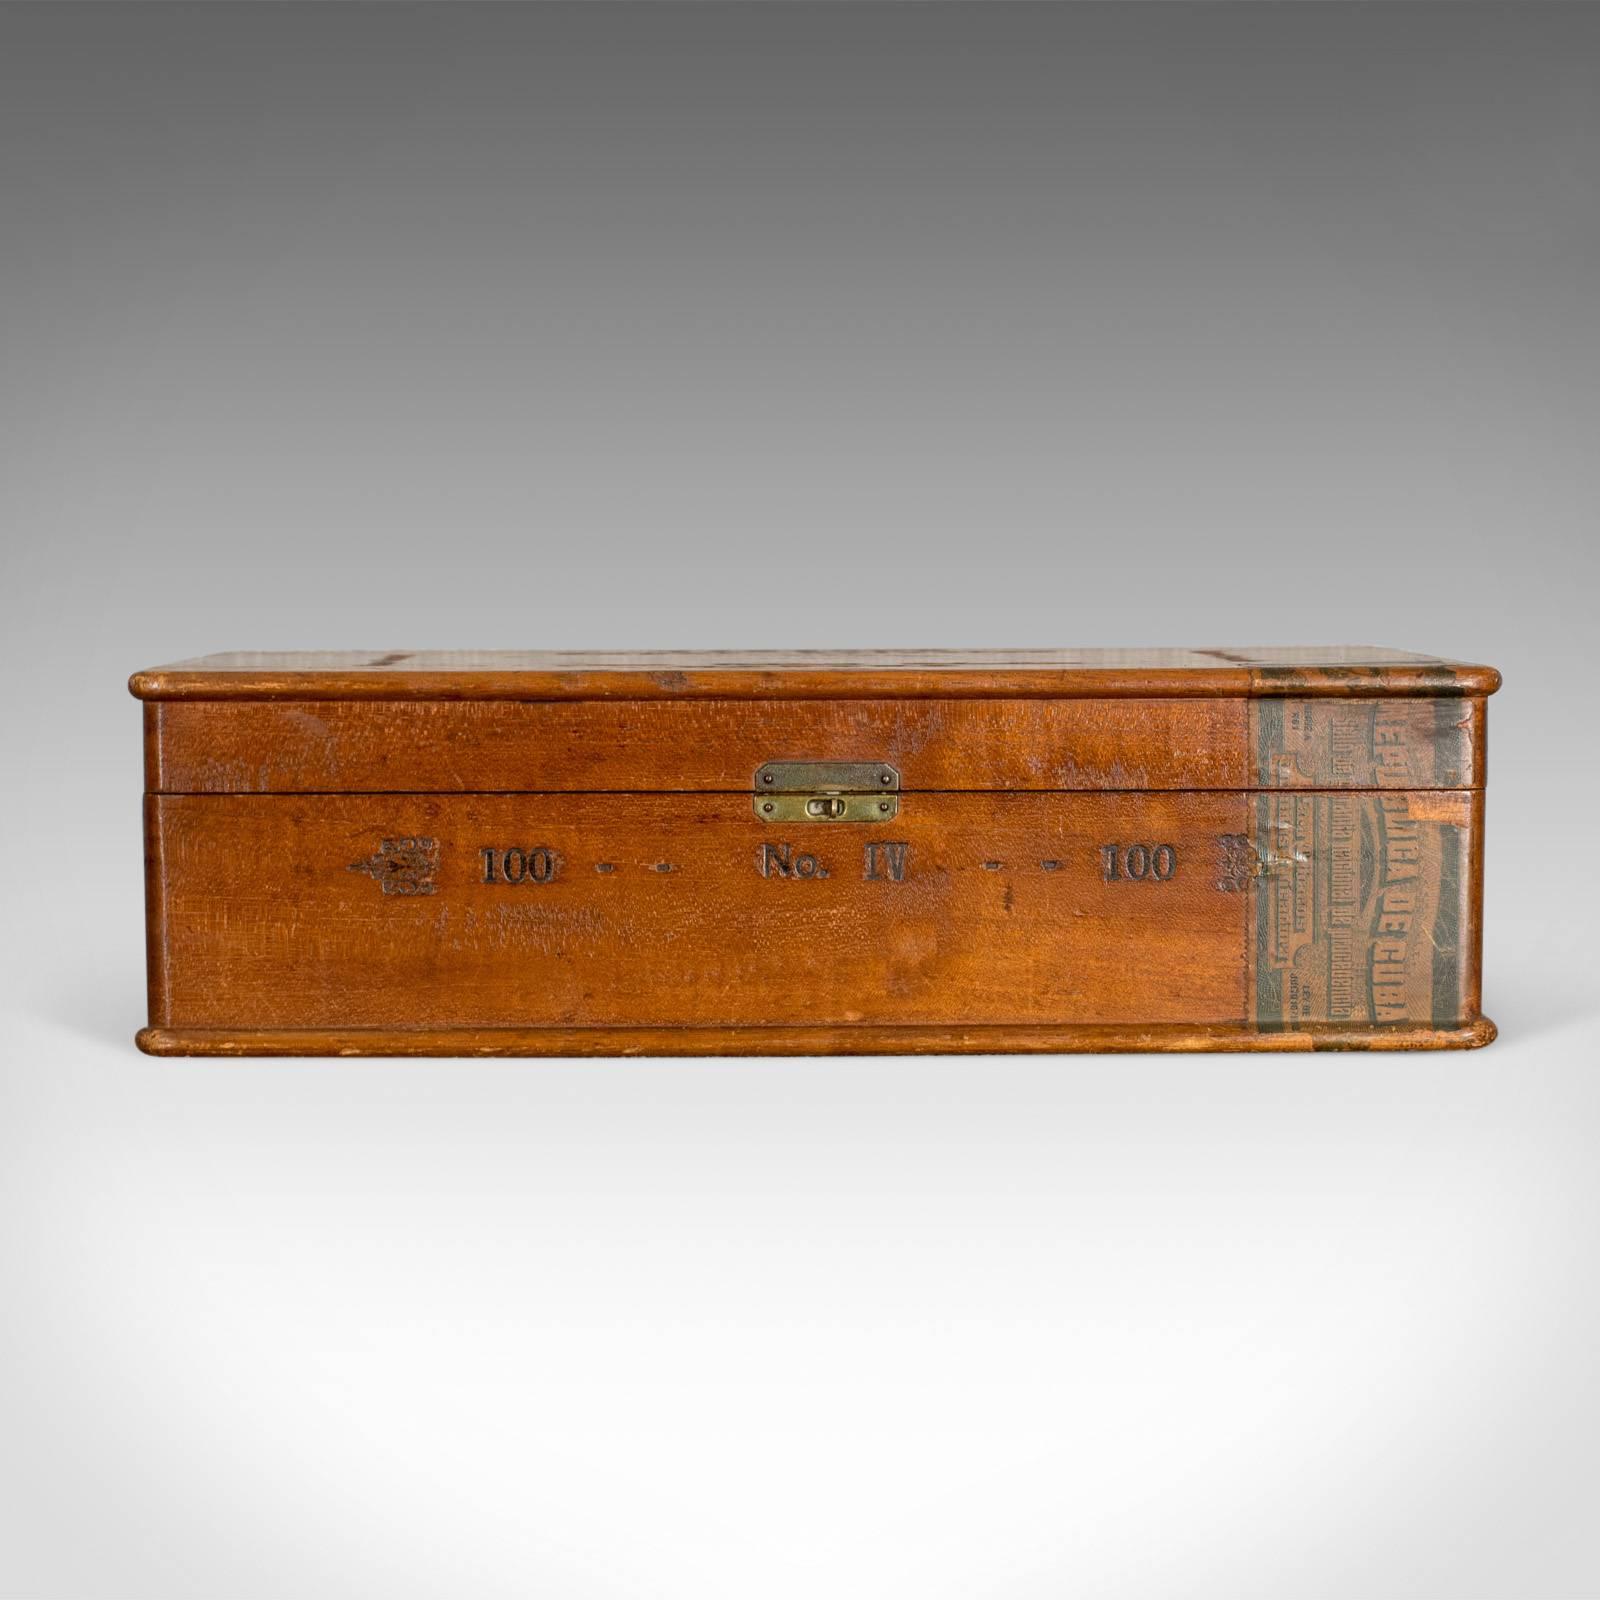 This is an antique wooden cigar box for Hoyo de Monterrey cigars from Havana / Habana, a humidor box dating to circa 1920.

A delightful, aesthetically appealing cigar box
Finished in fine mahogany with a cedar lining
Appealing aroma of cedar